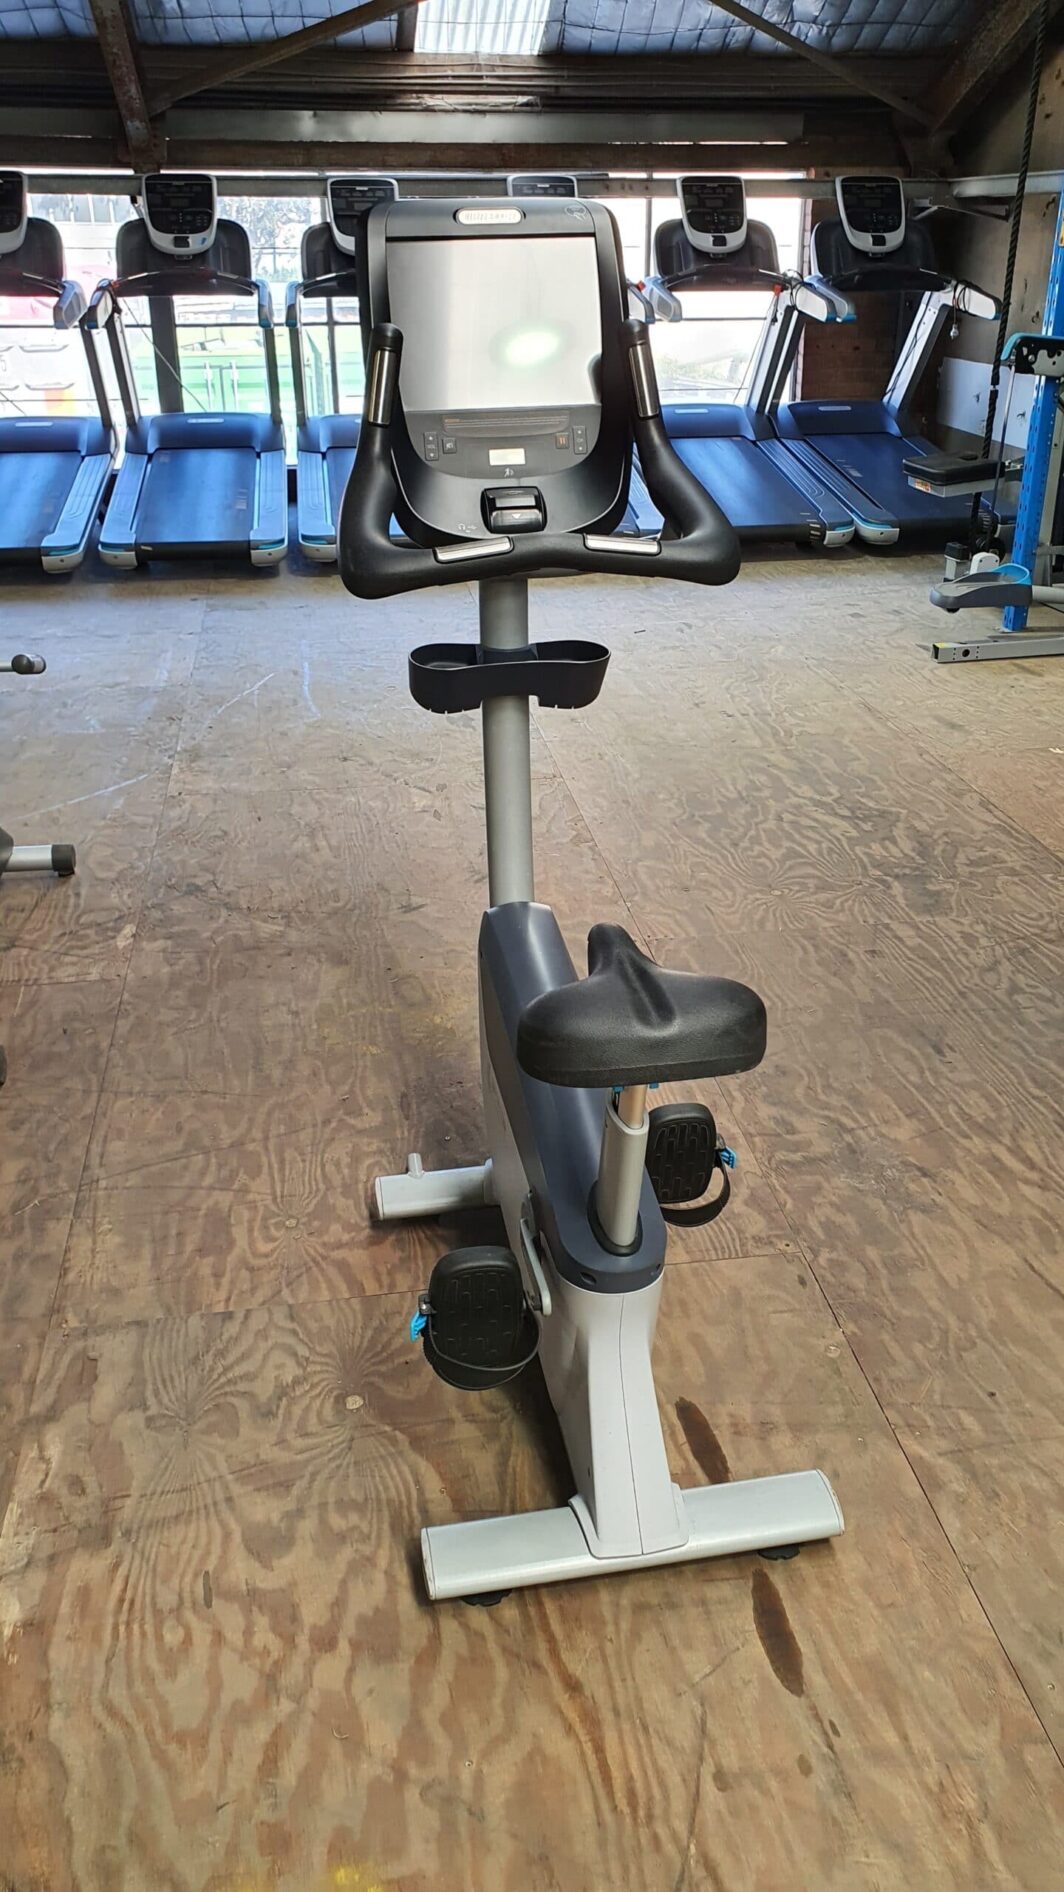 Precor UBK-885 Upright Bike w/ P82 Touch Screen second hand gym equipment